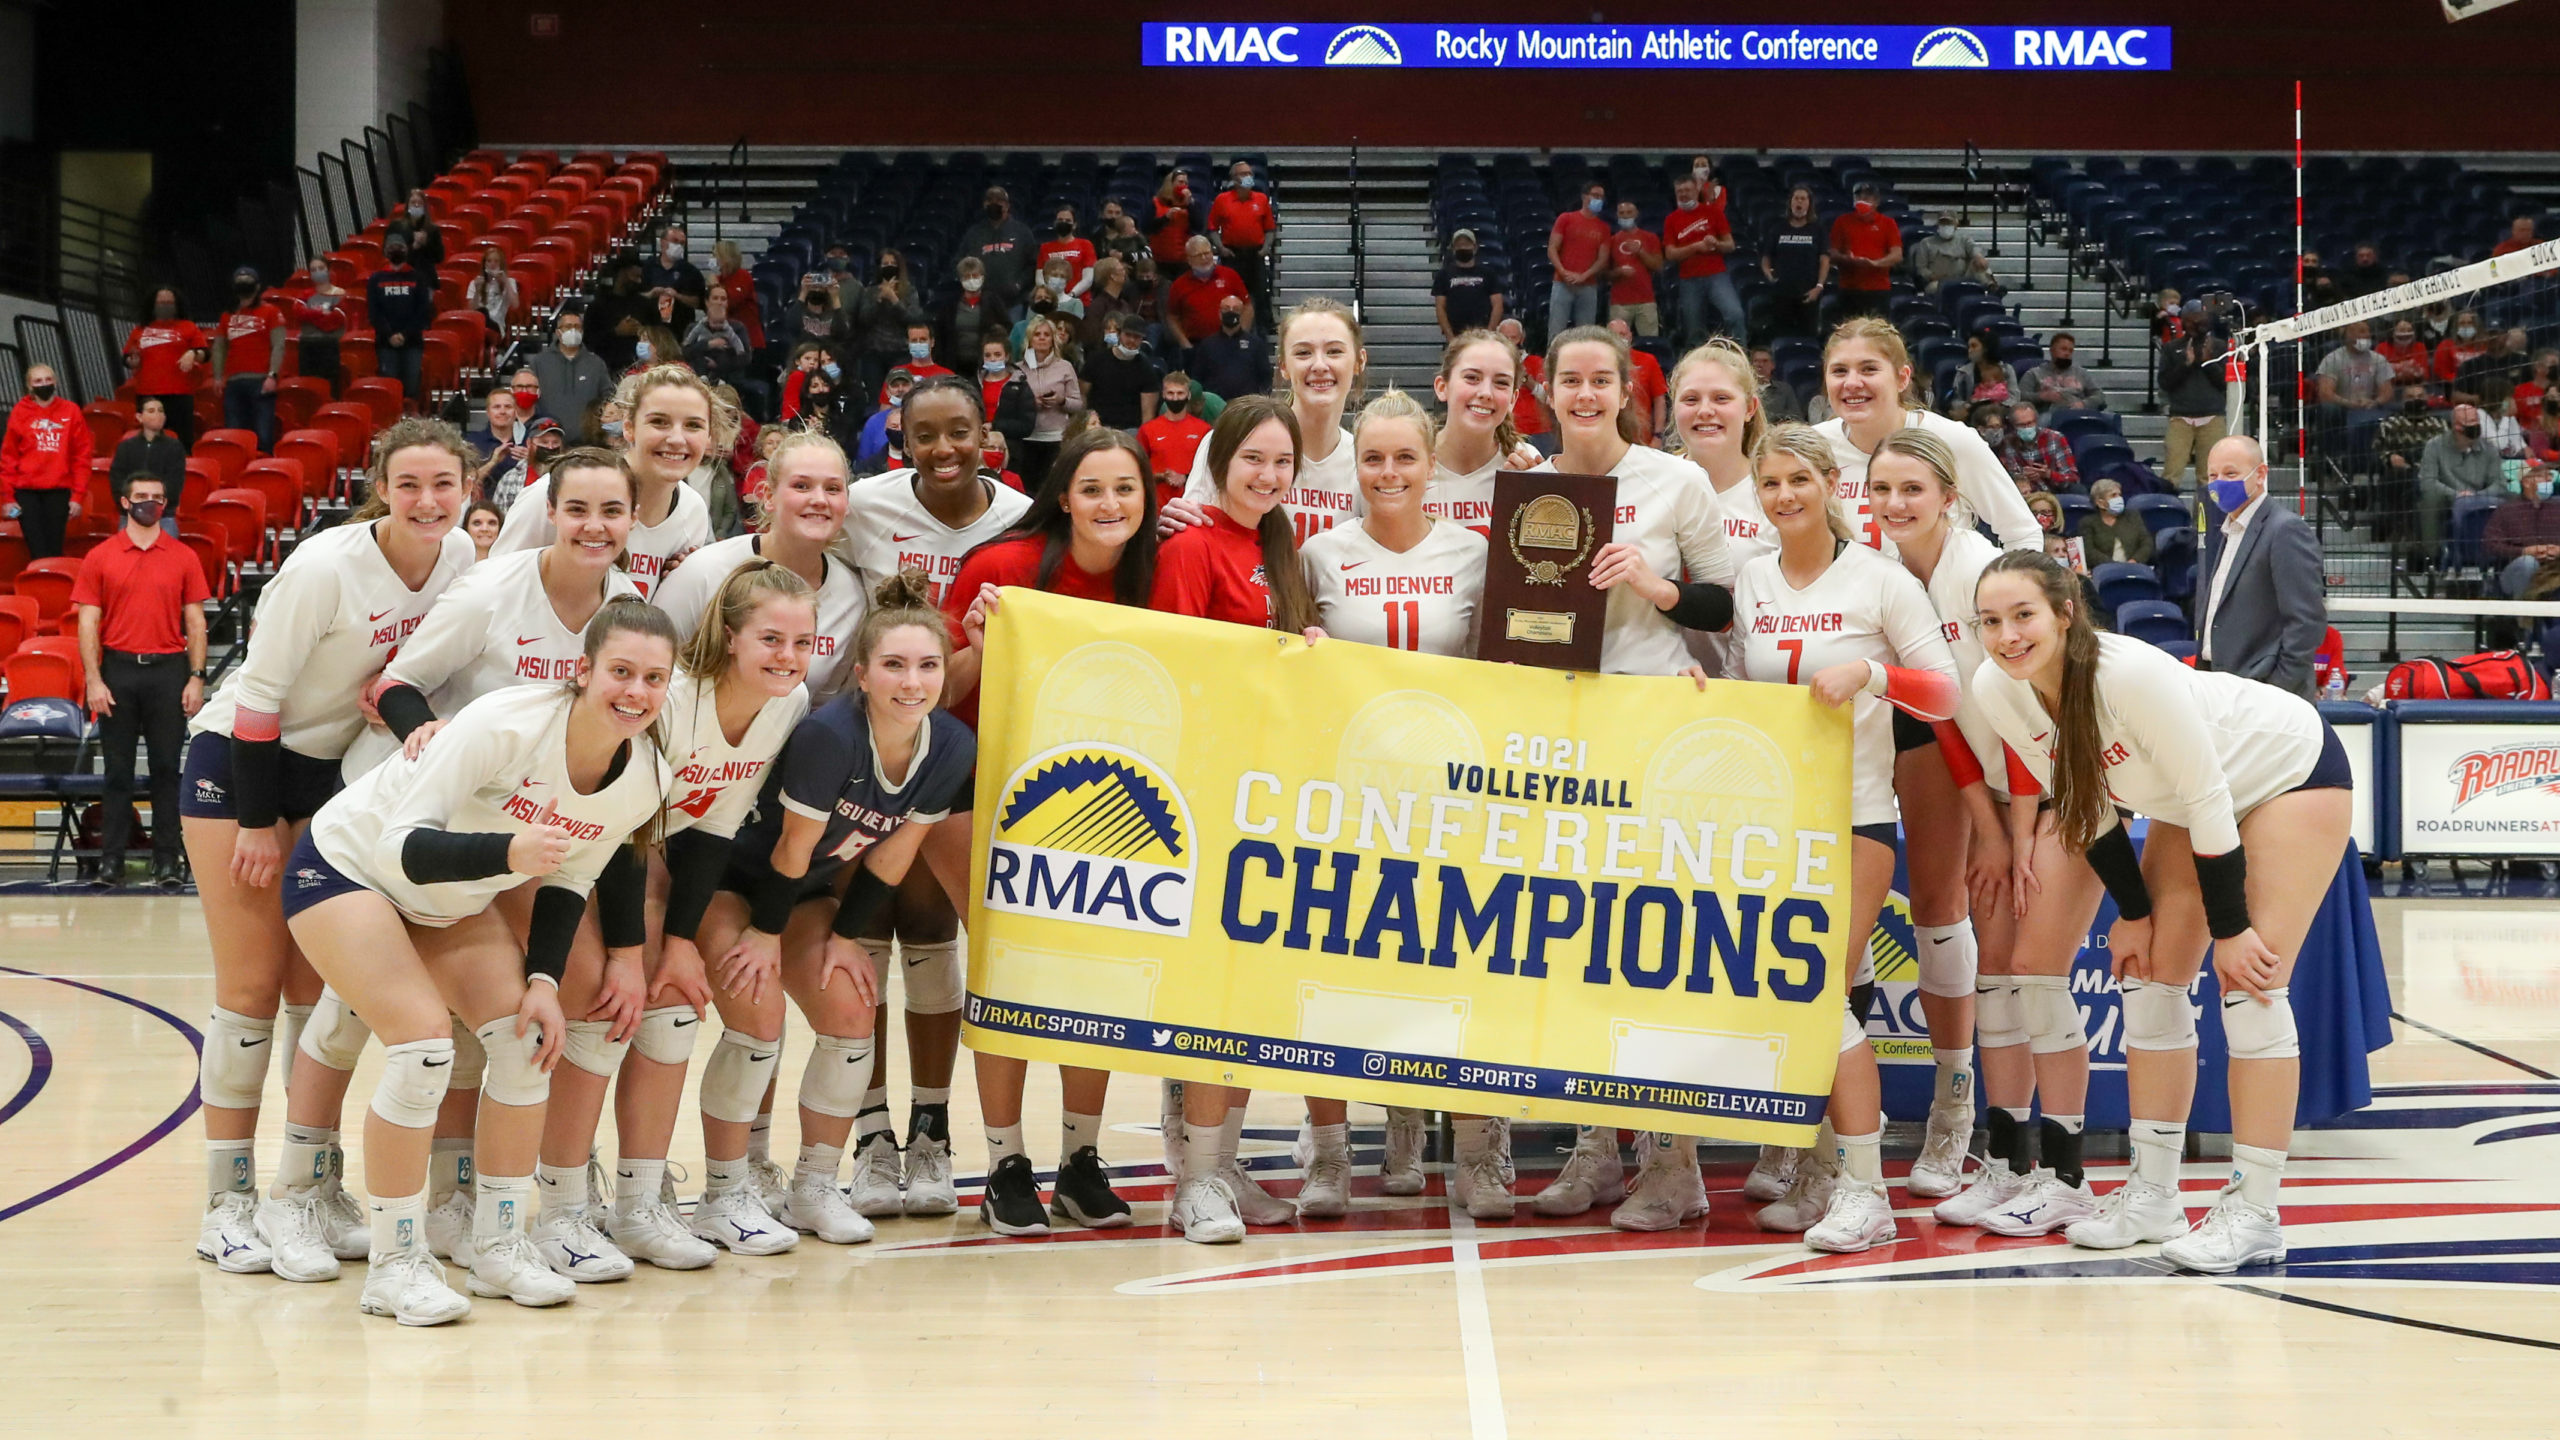 Roadrunners volleyball team celebrates the 2021 RMAC Championship with the banner.